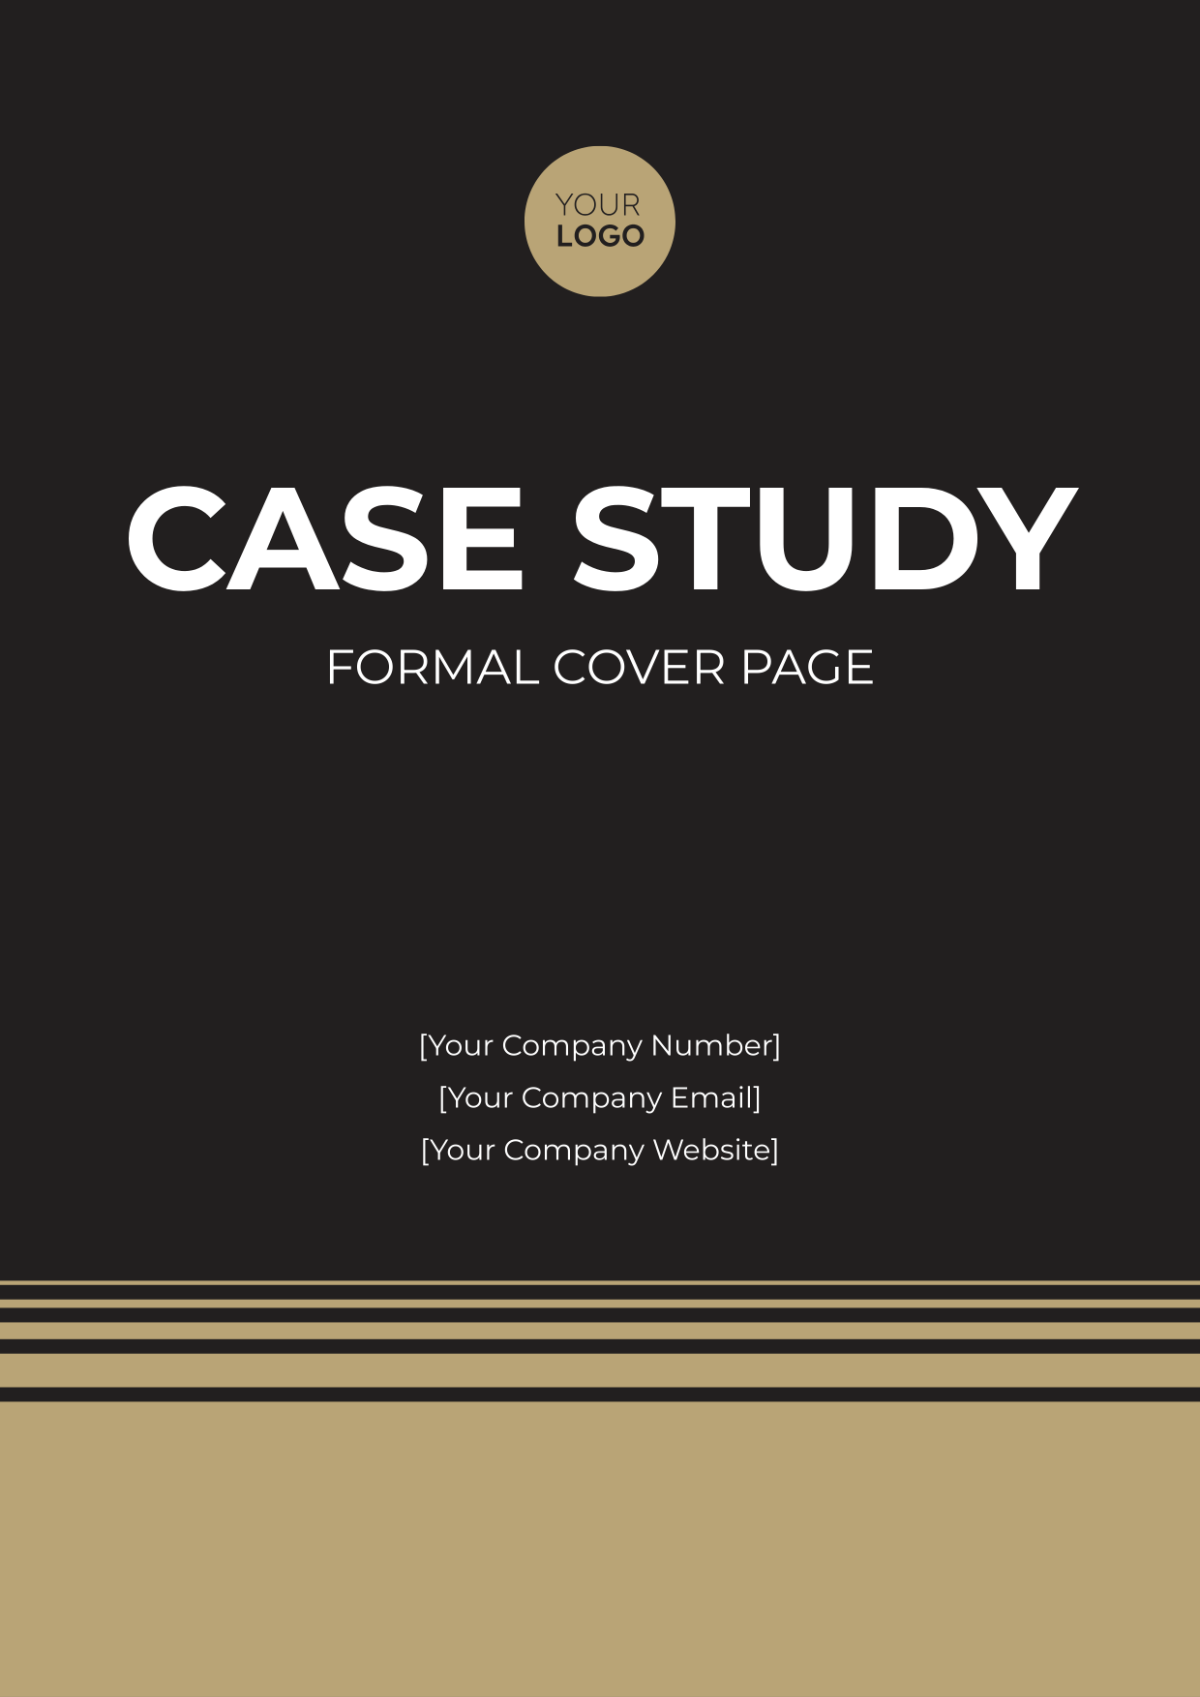 Case Study Formal Cover Page